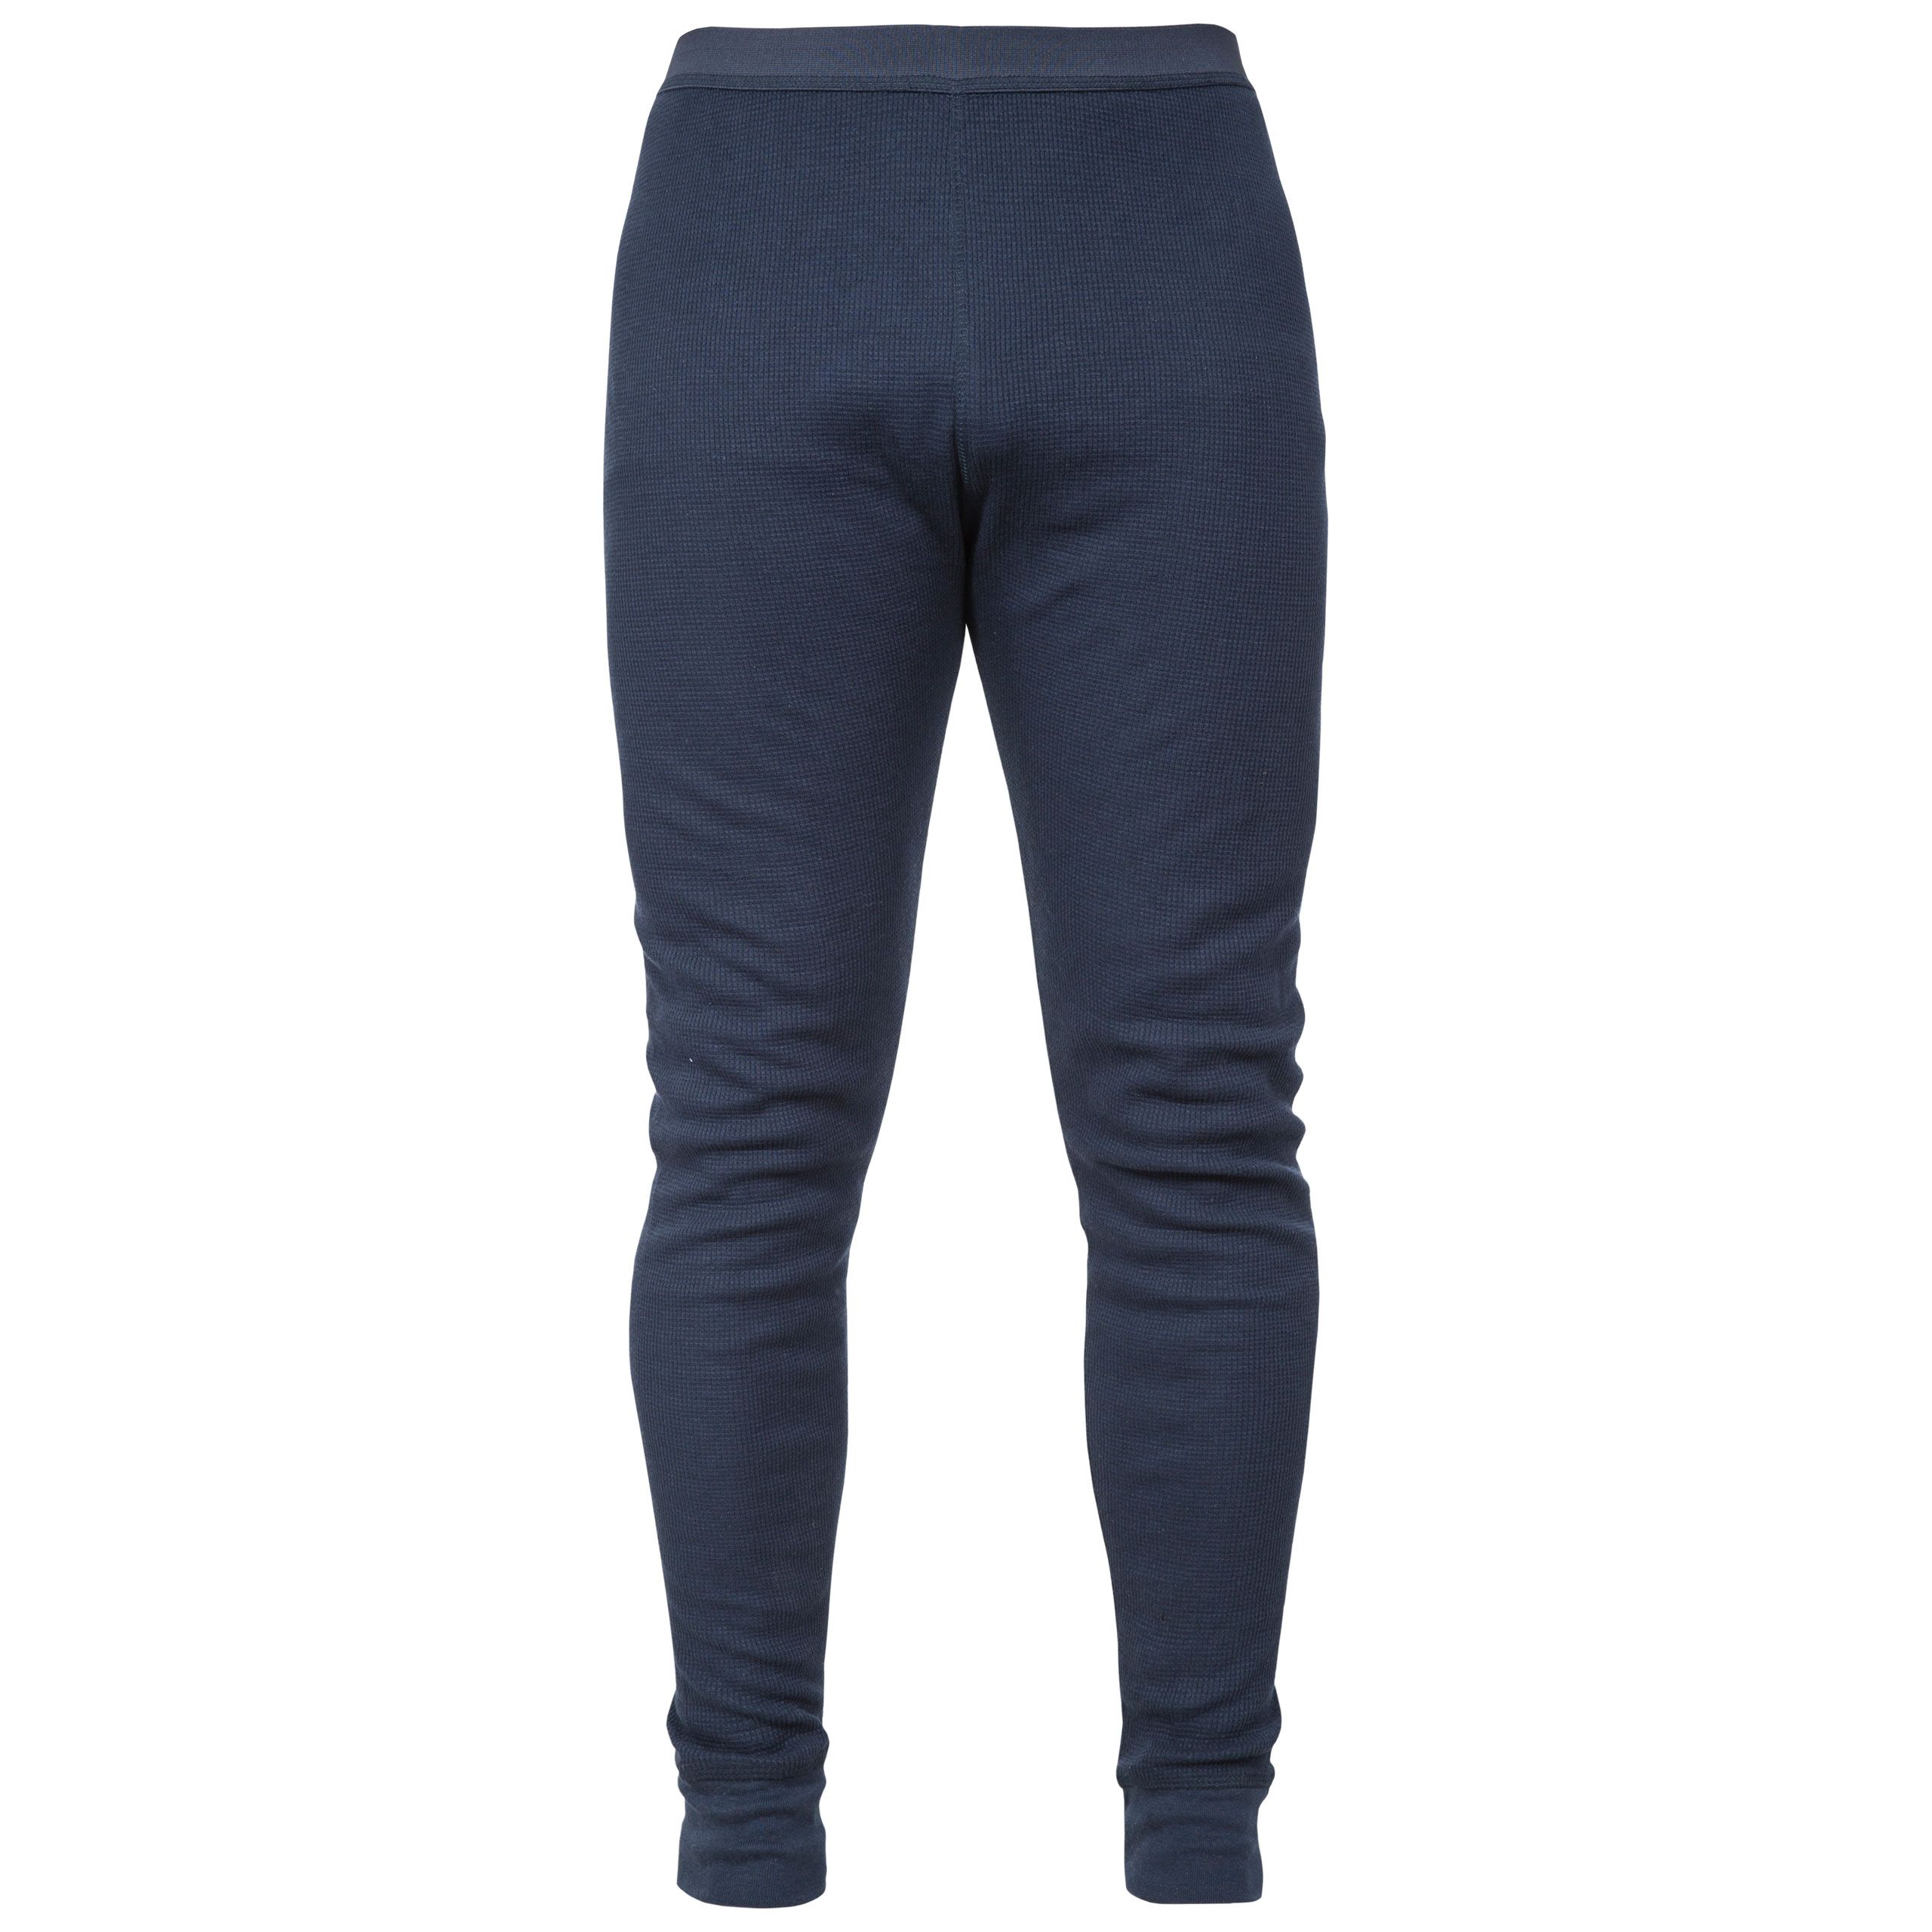 Enigma Unisex Super Soft Thermal Trousers